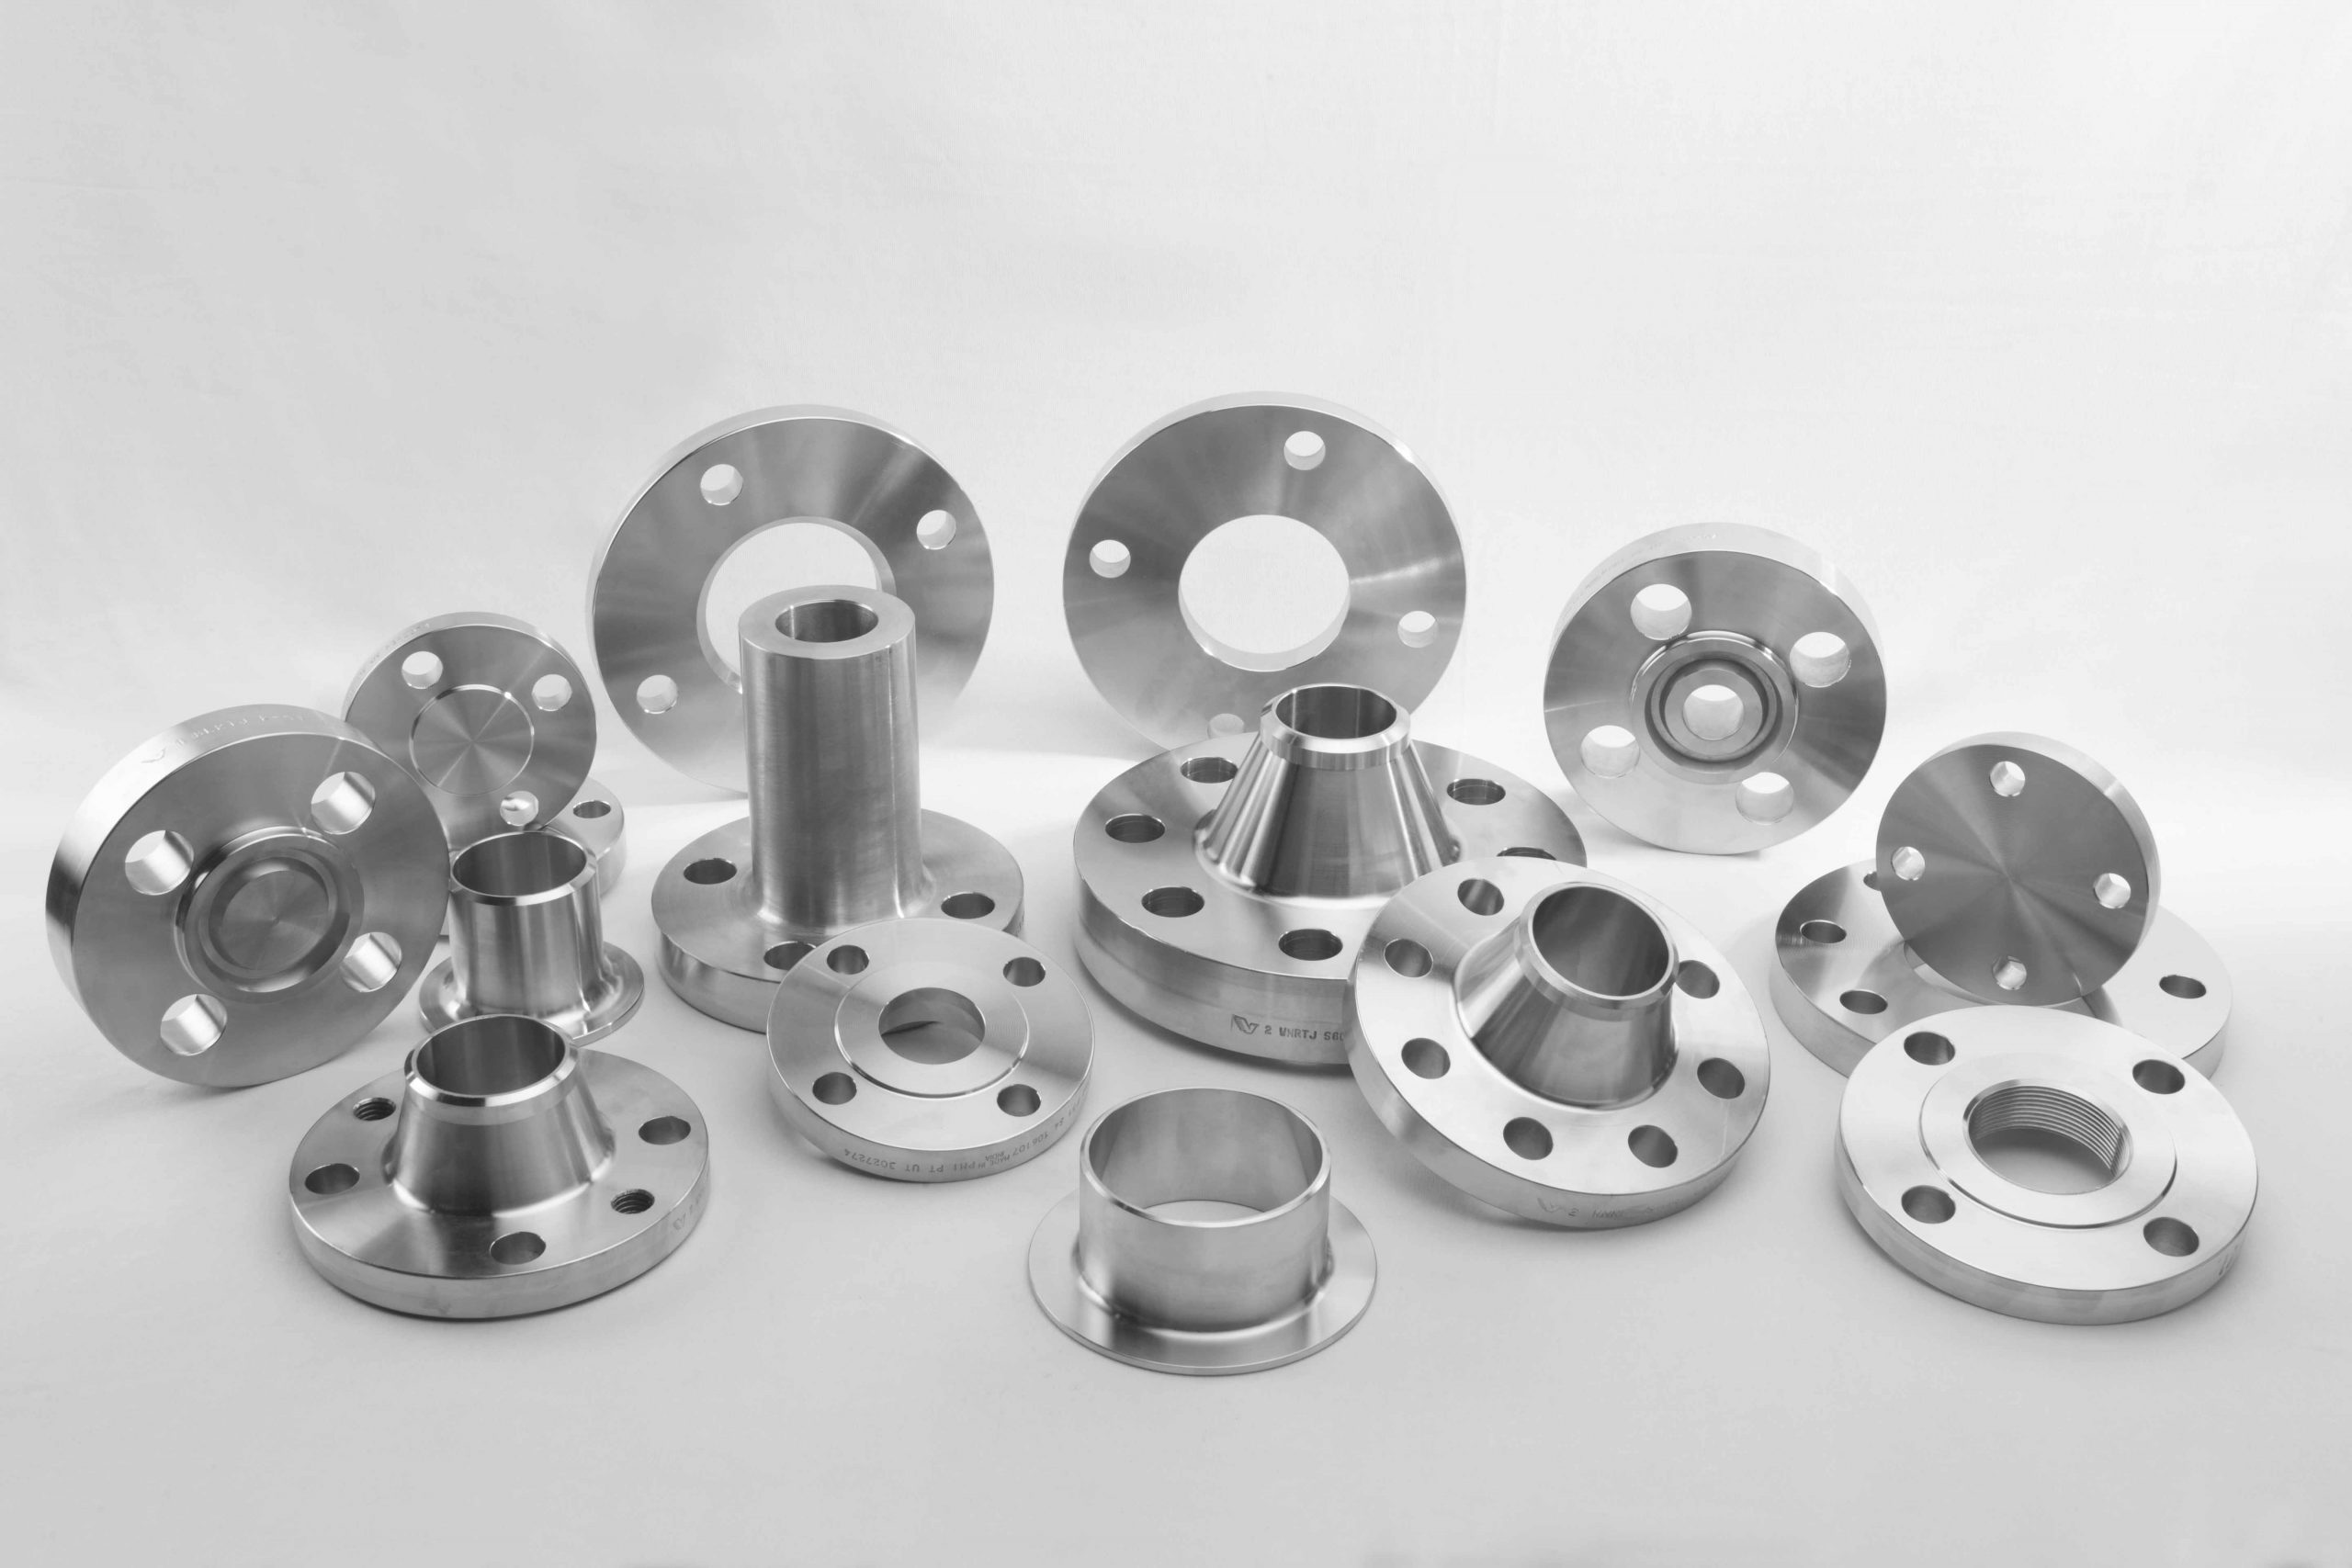 Flanges Marketto Grow at a CAGR of 5.0% from 2022 to 2031: Allied Market Research